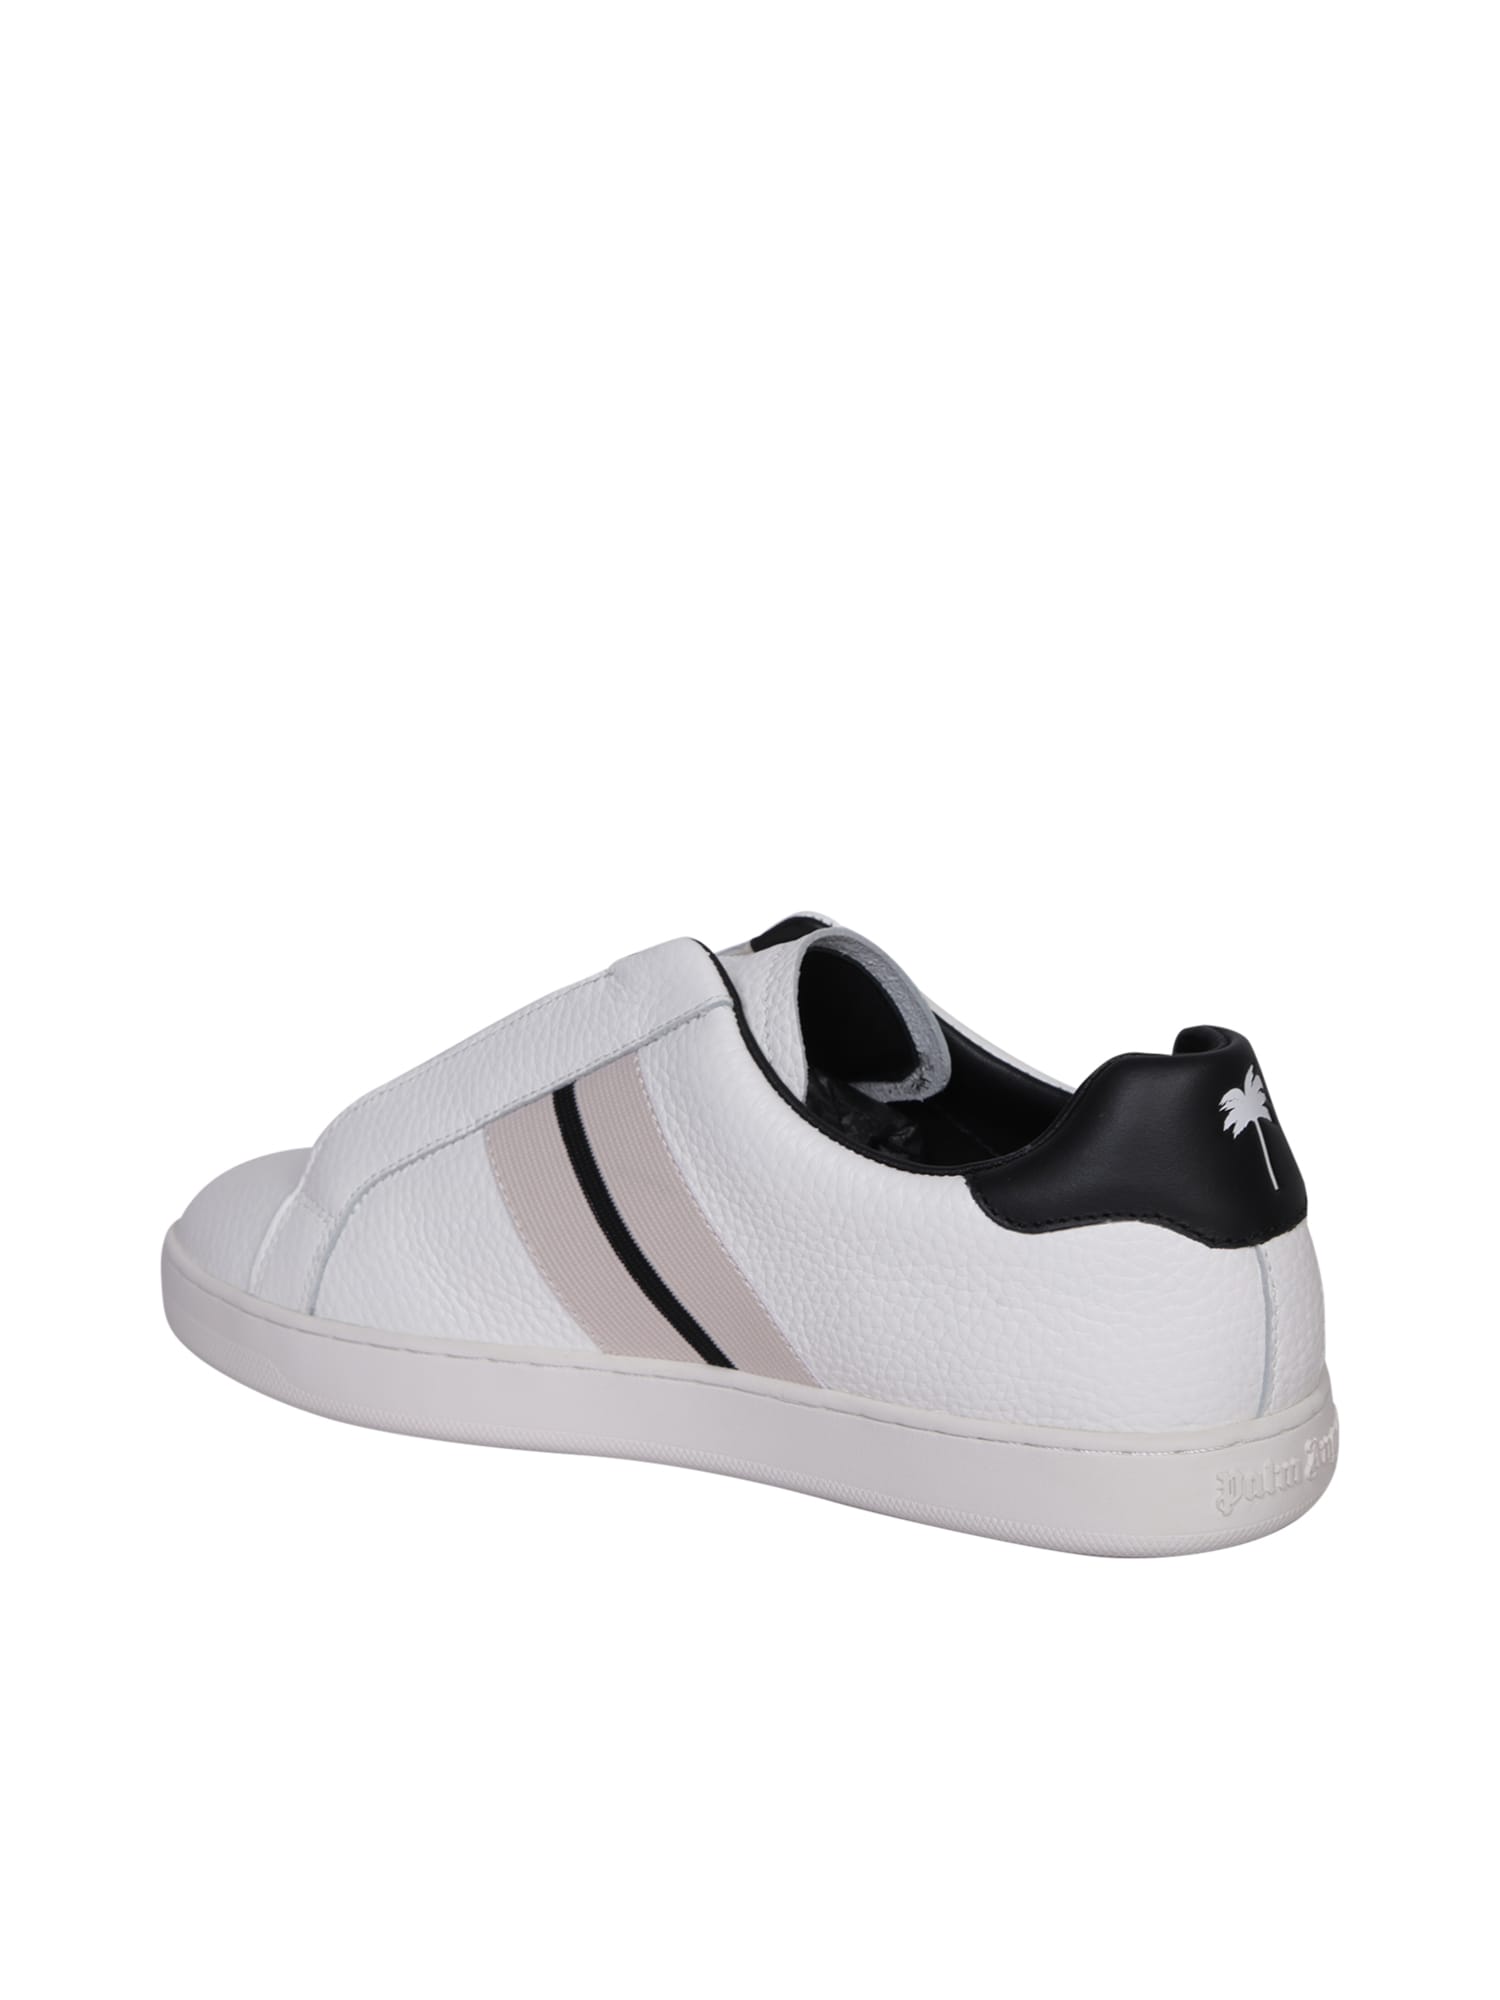 Shop Palm Angels Track Palm 1 White Sneakers In Black